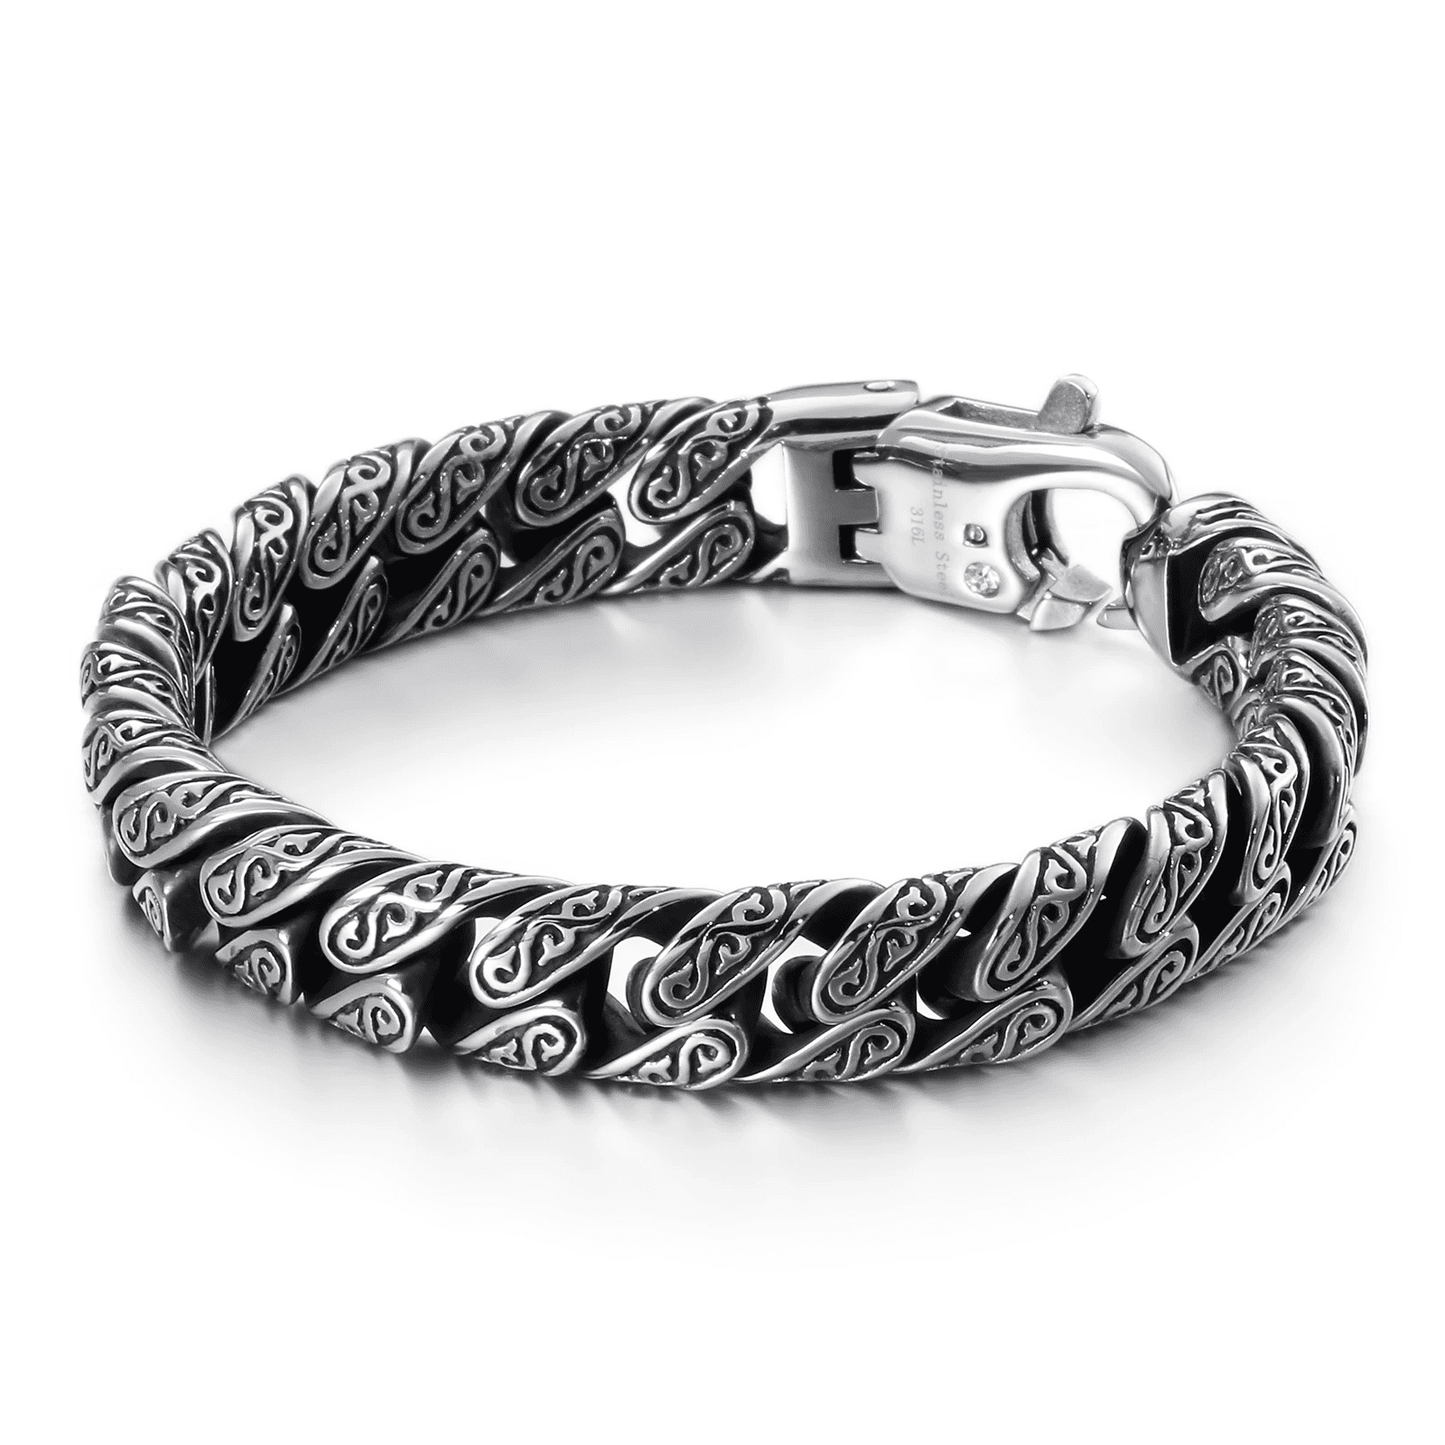 Egyptian Ankh - 12mm Pure Titanium Steel Bracelet, Curb Chain Bracelet with Lobster Claw Buckle for Men & Boy (8inch)